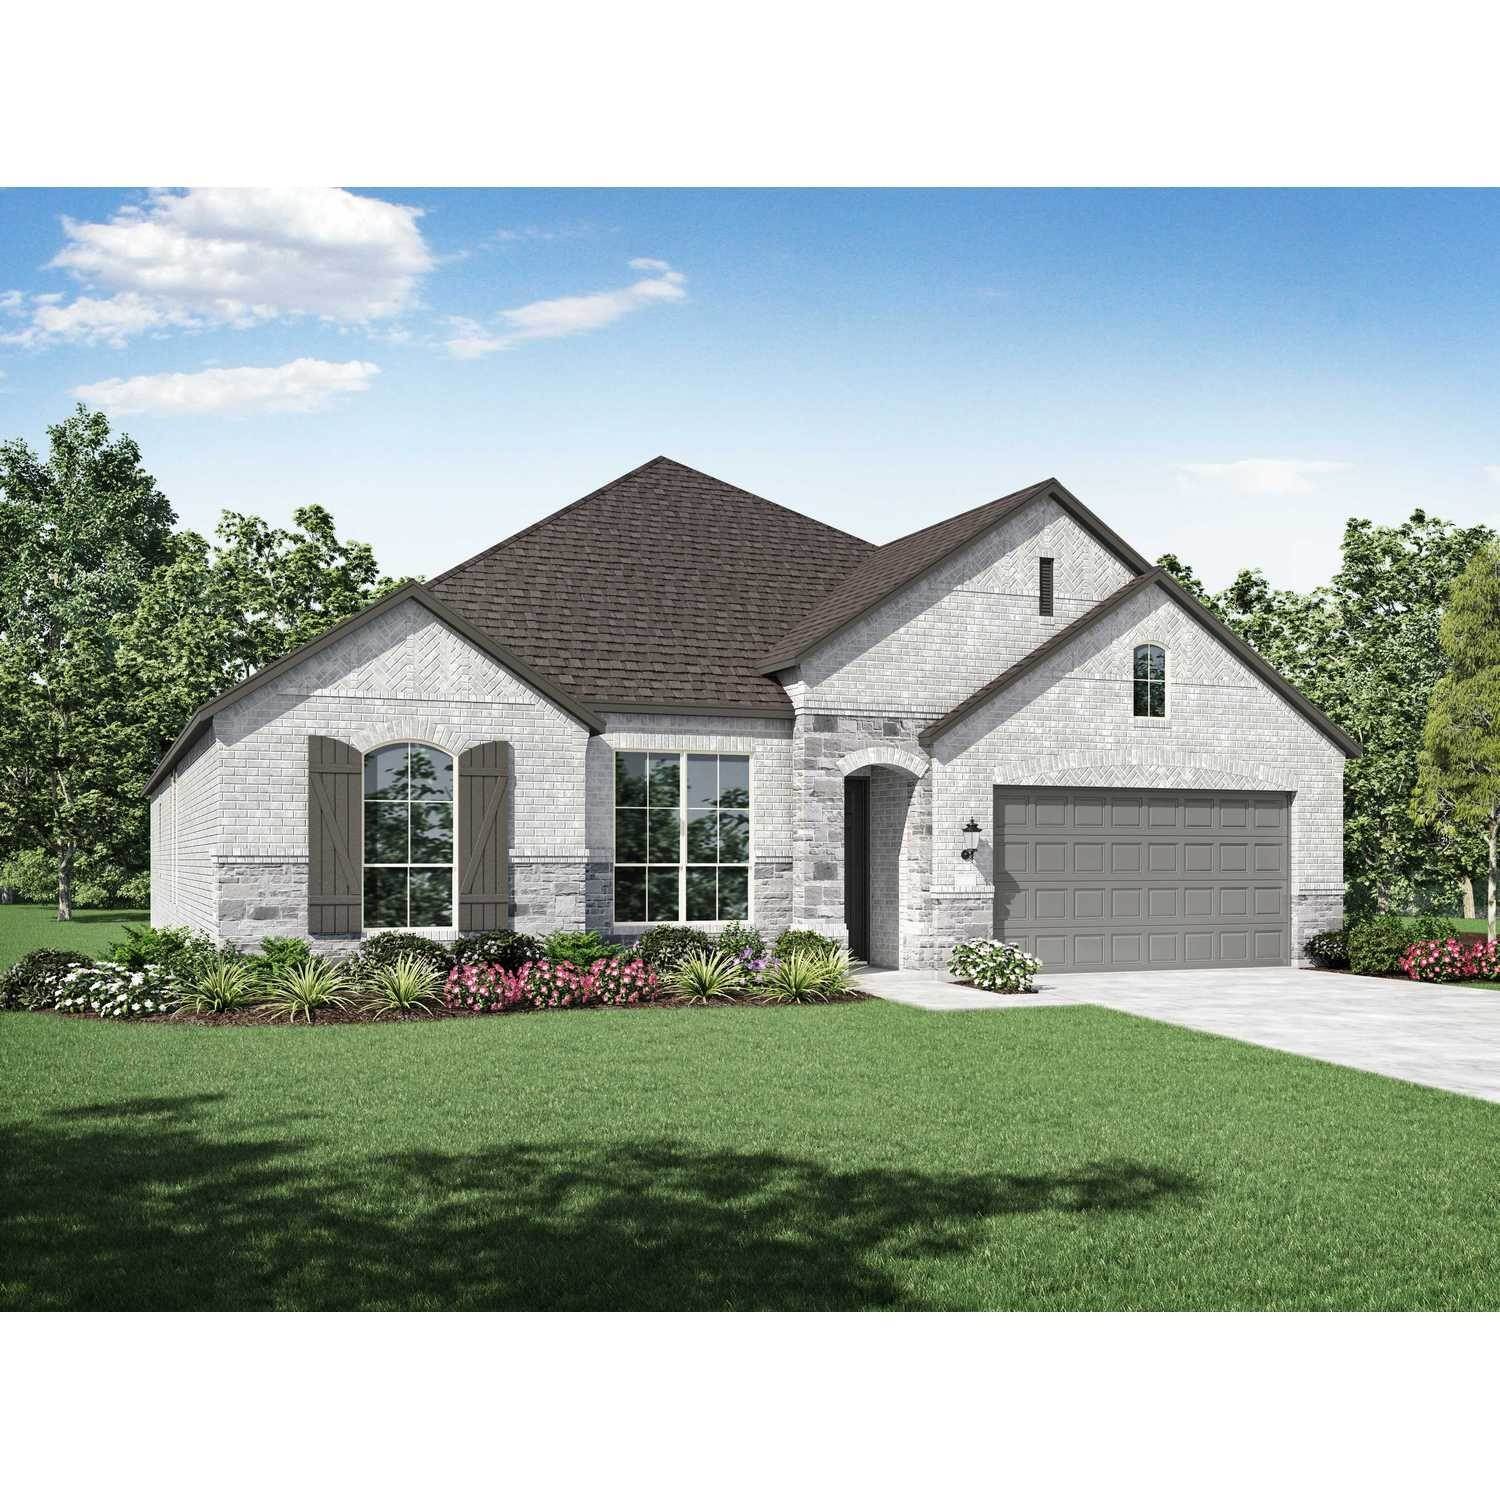 Single Family for Sale at Monterra: 70ft. Lots 1018 Monterra Way, Fate, TX 75087